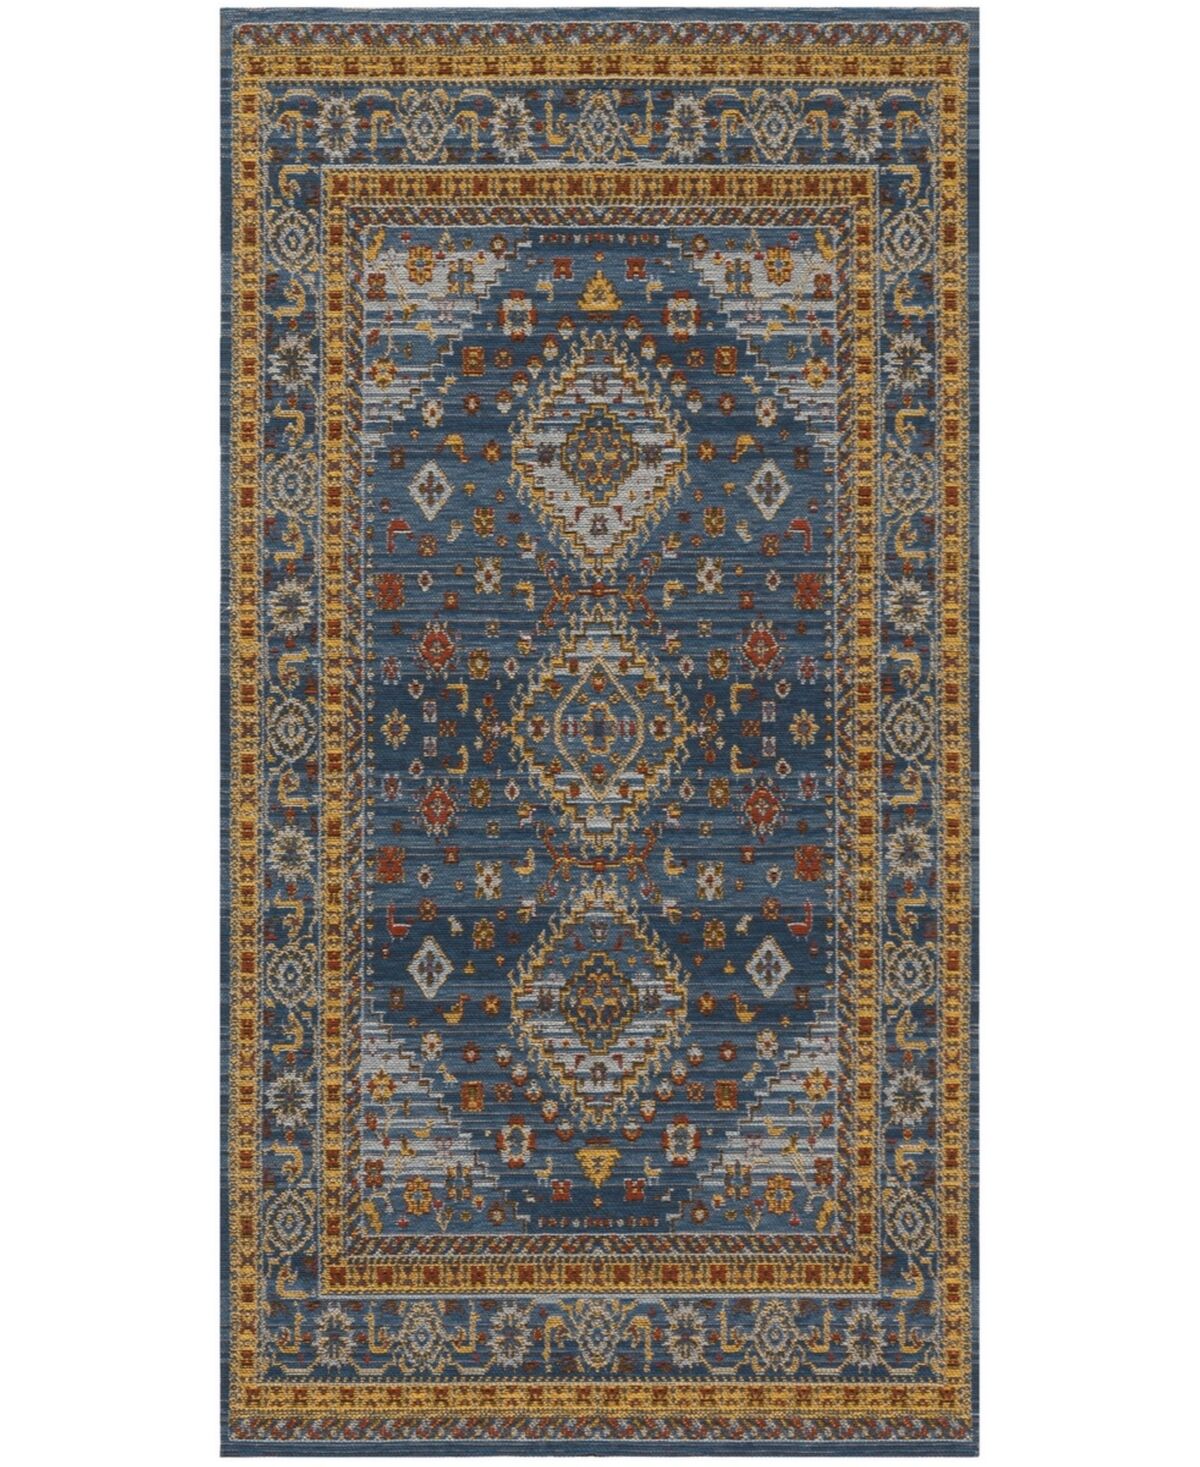 Safavieh Classic Vintage CLV114 Blue and Gold 6' x 9' Area Rug - Blue